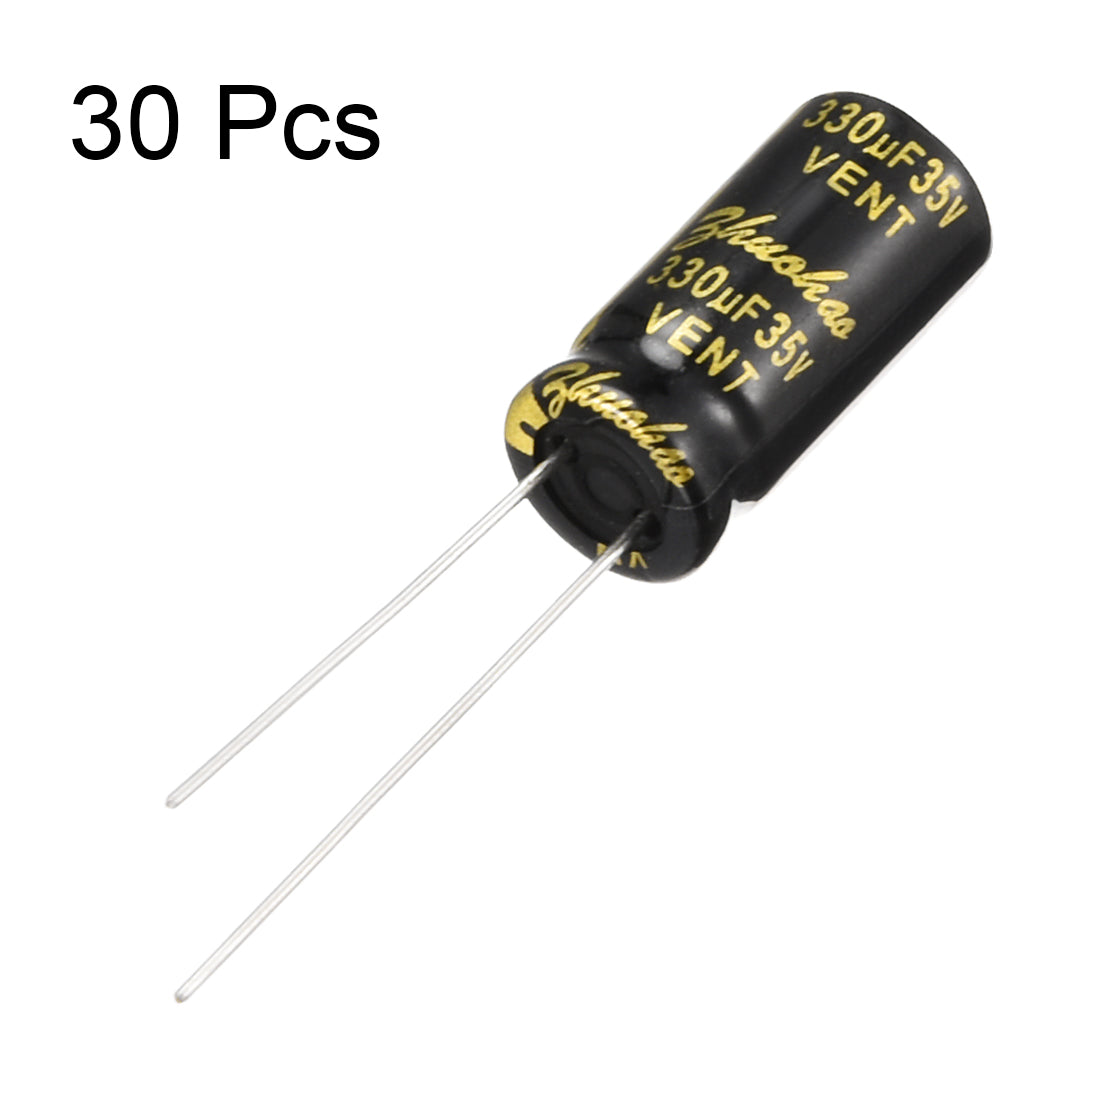 uxcell Uxcell Aluminum Radial Electrolytic Capacitor with 330uF 35V 105 Celsius Life 2000H 8 x 16 mm Black 30pcs